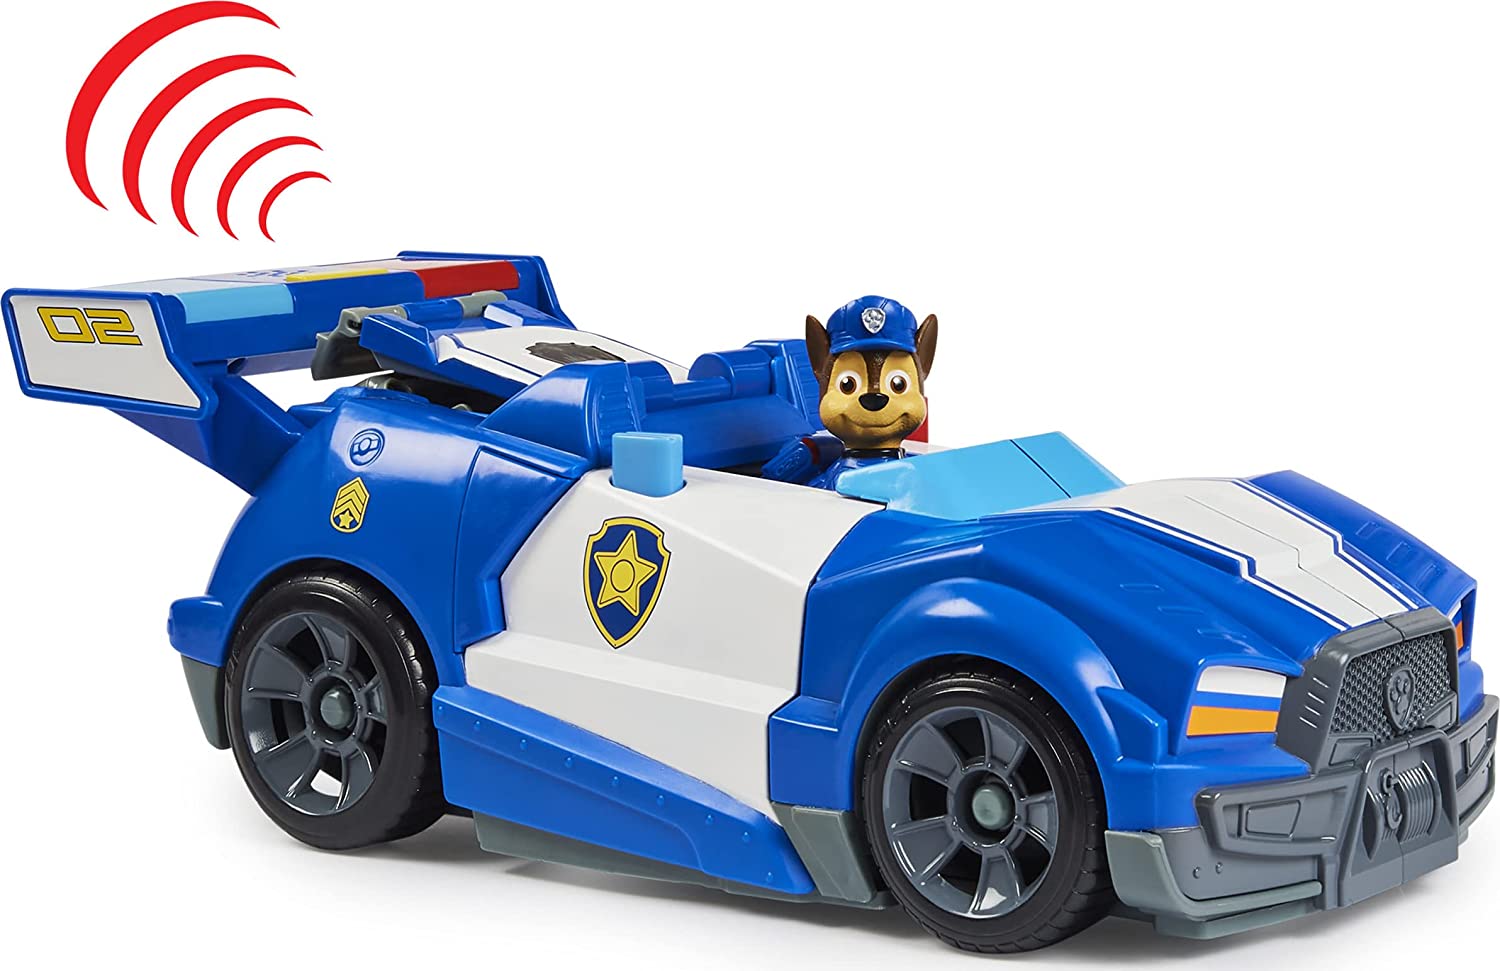 Transformable vehicle Chase Paw The Movie